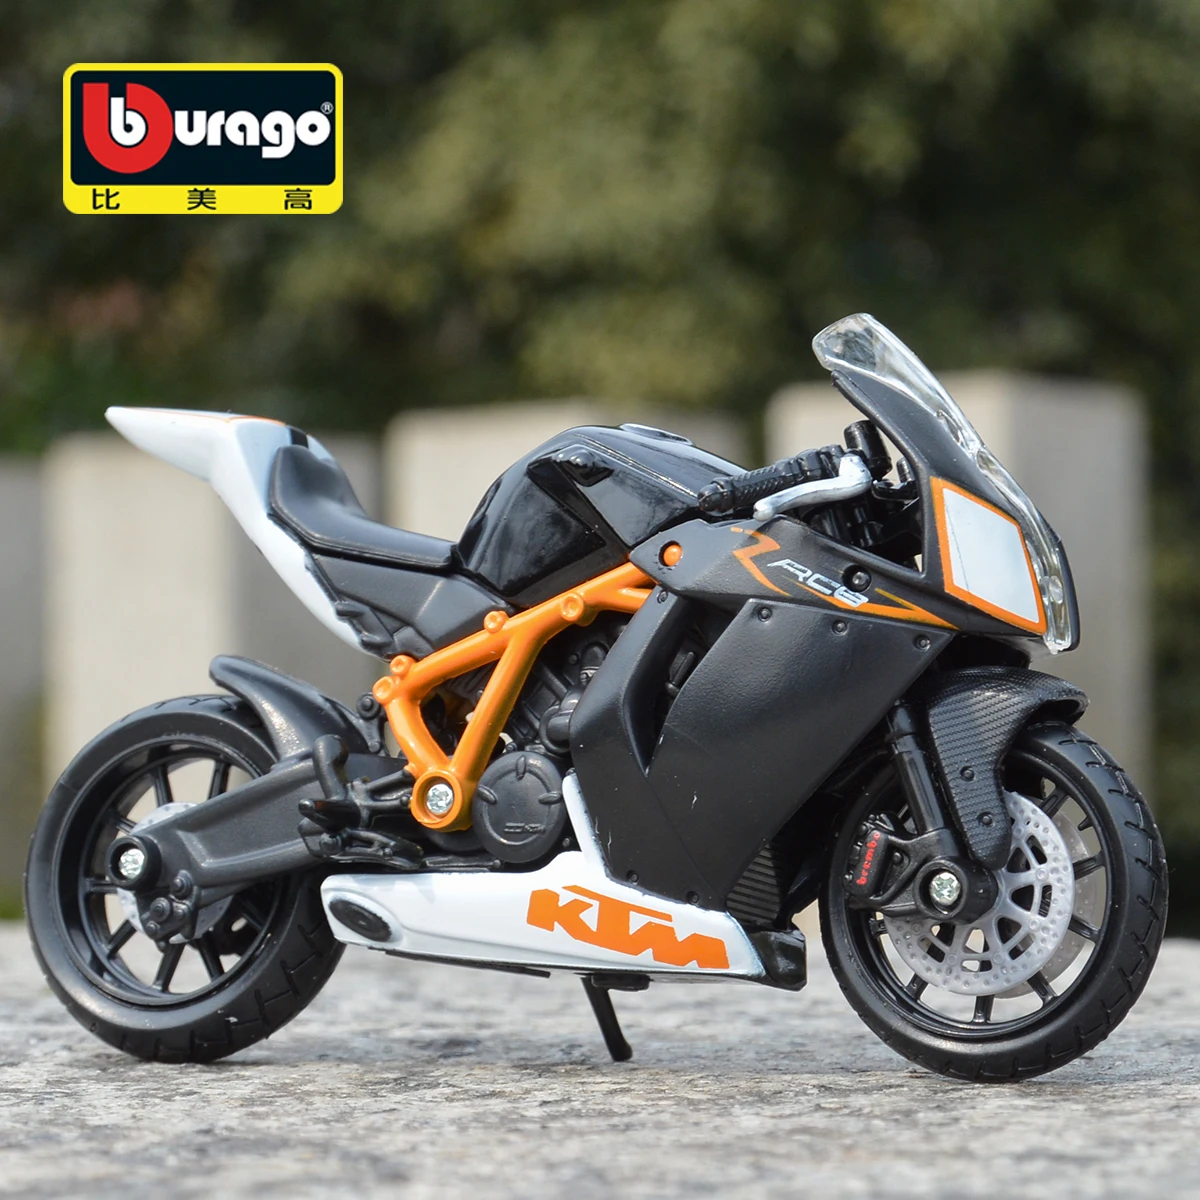 

Bburago 1:18 KTM 1190 RC8 R Static Die Cast Vehicles Collectible Hobbies Motorcycle Model Toys